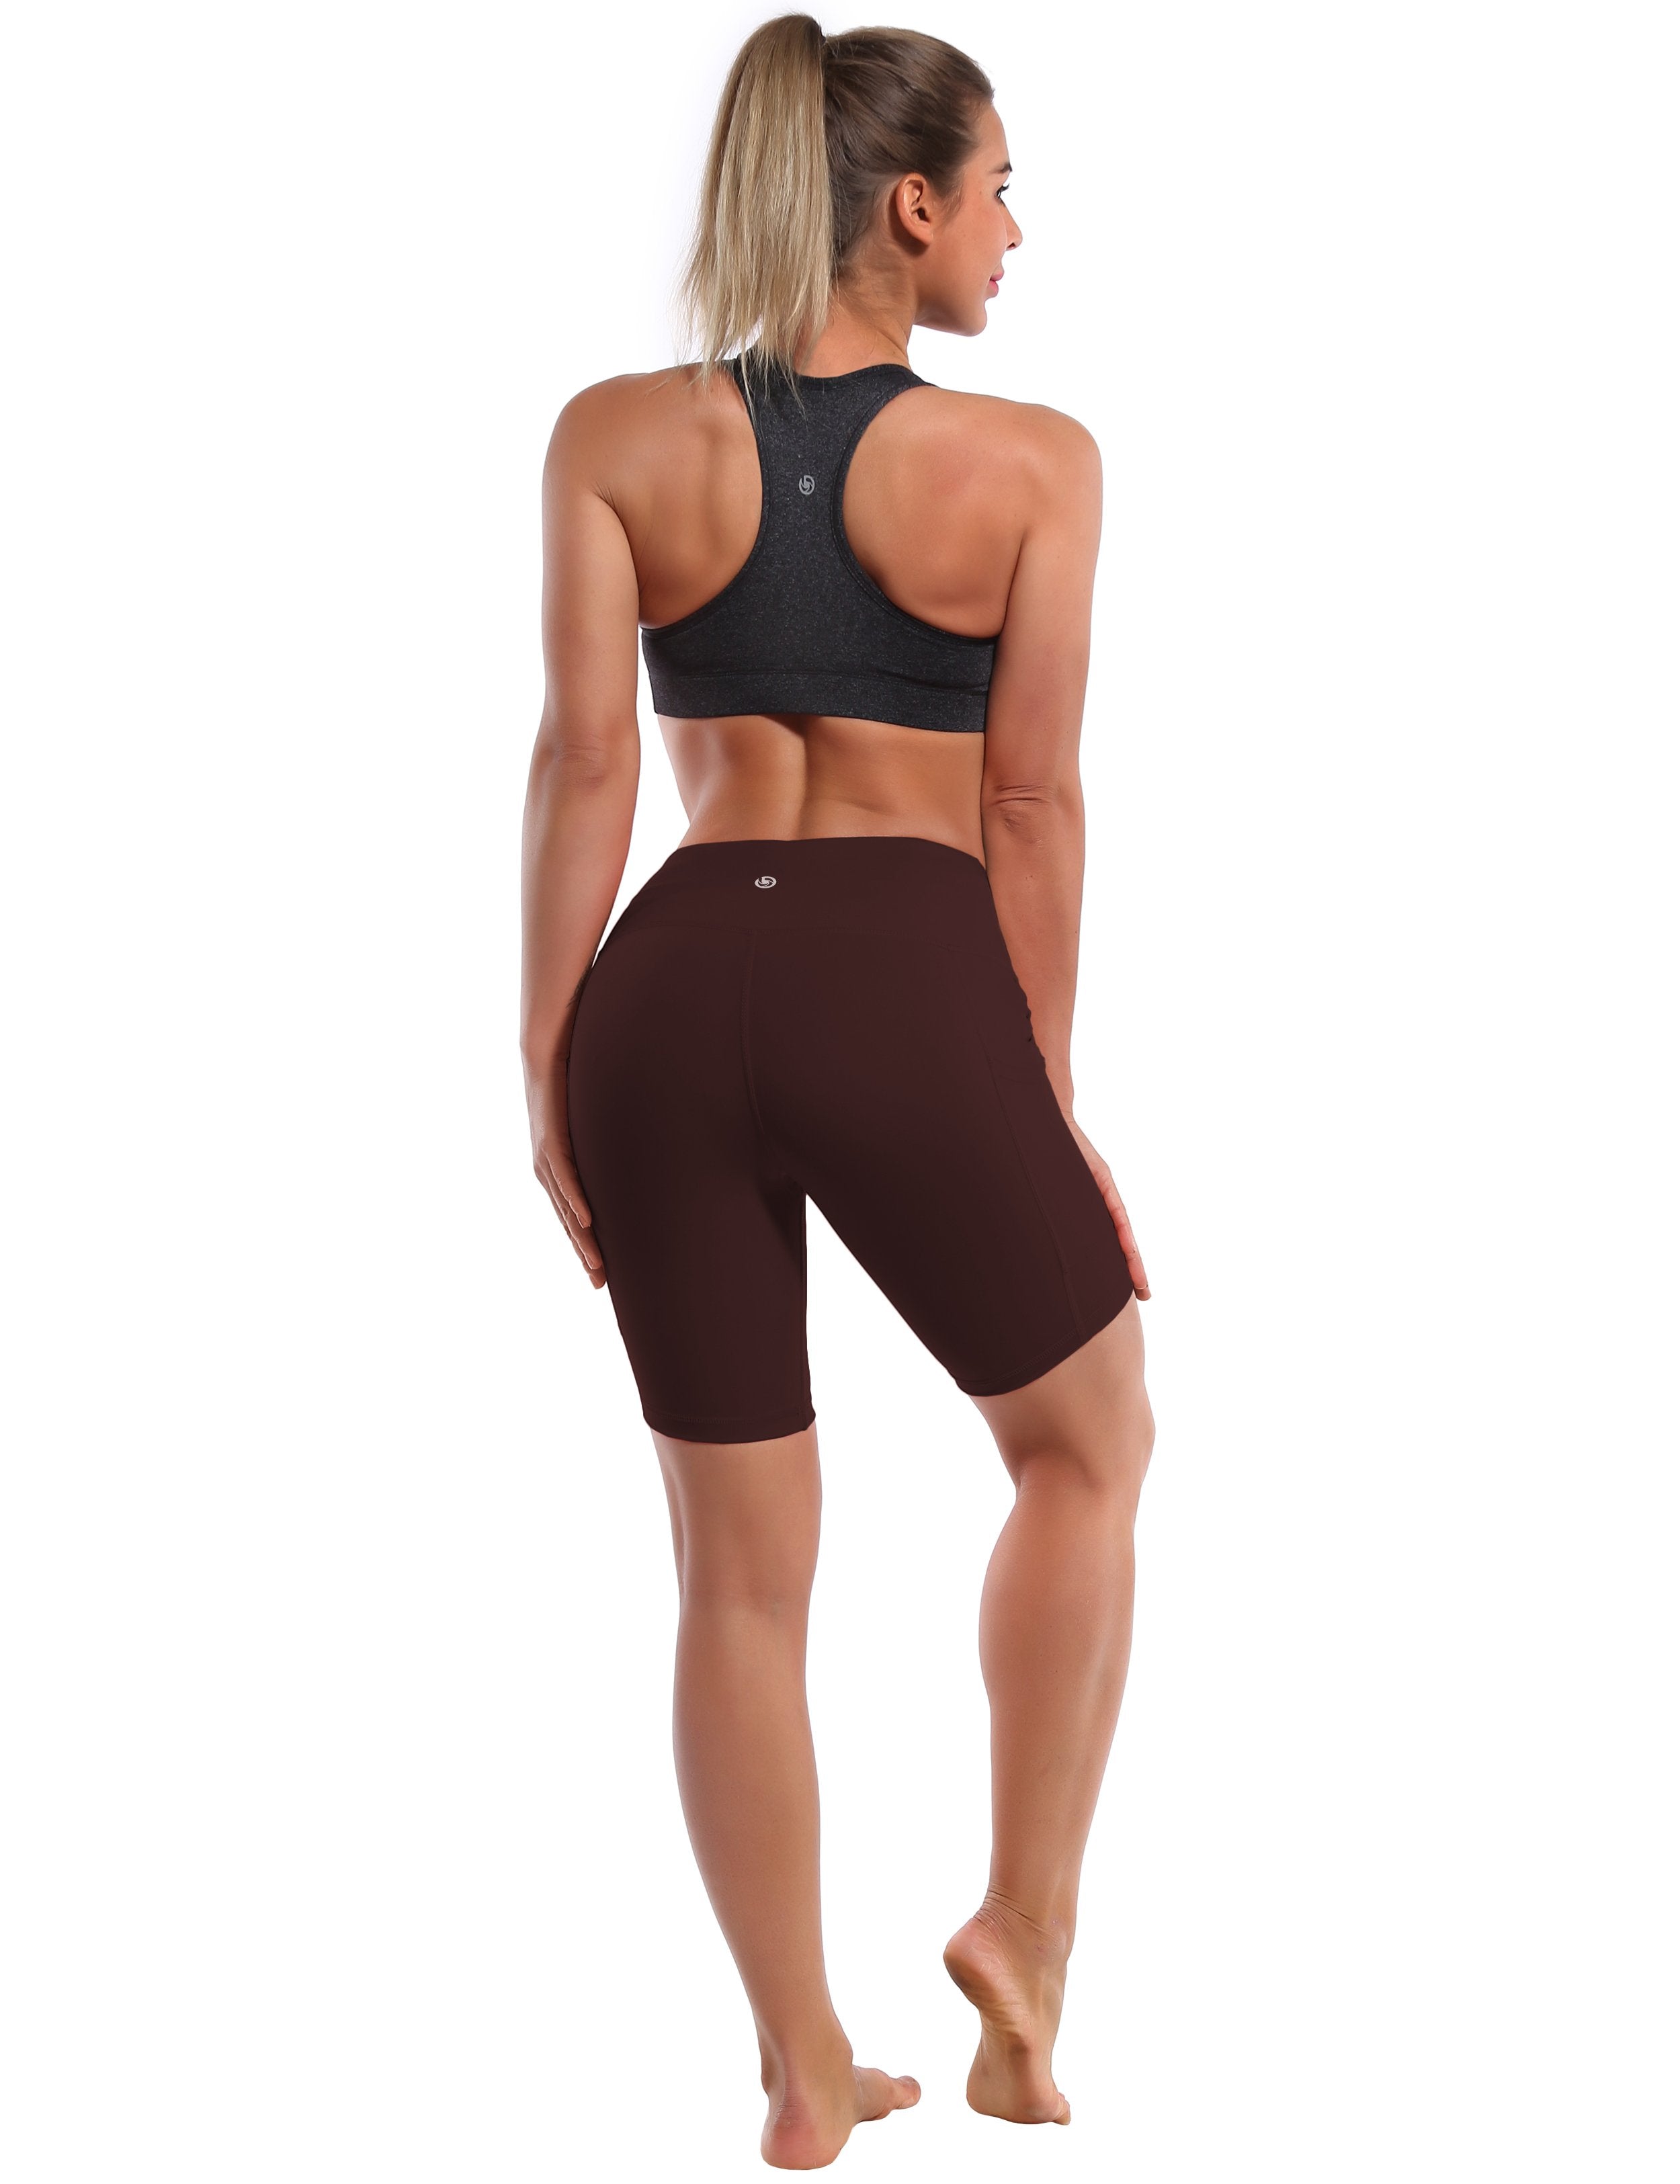 8" Side Pockets Running Shorts mahoganymaroon Sleek, soft, smooth and totally comfortable: our newest style is here. Softest-ever fabric High elasticity High density 4-way stretch Fabric doesn't attract lint easily No see-through Moisture-wicking Machine wash 75% Nylon, 25% Spandex